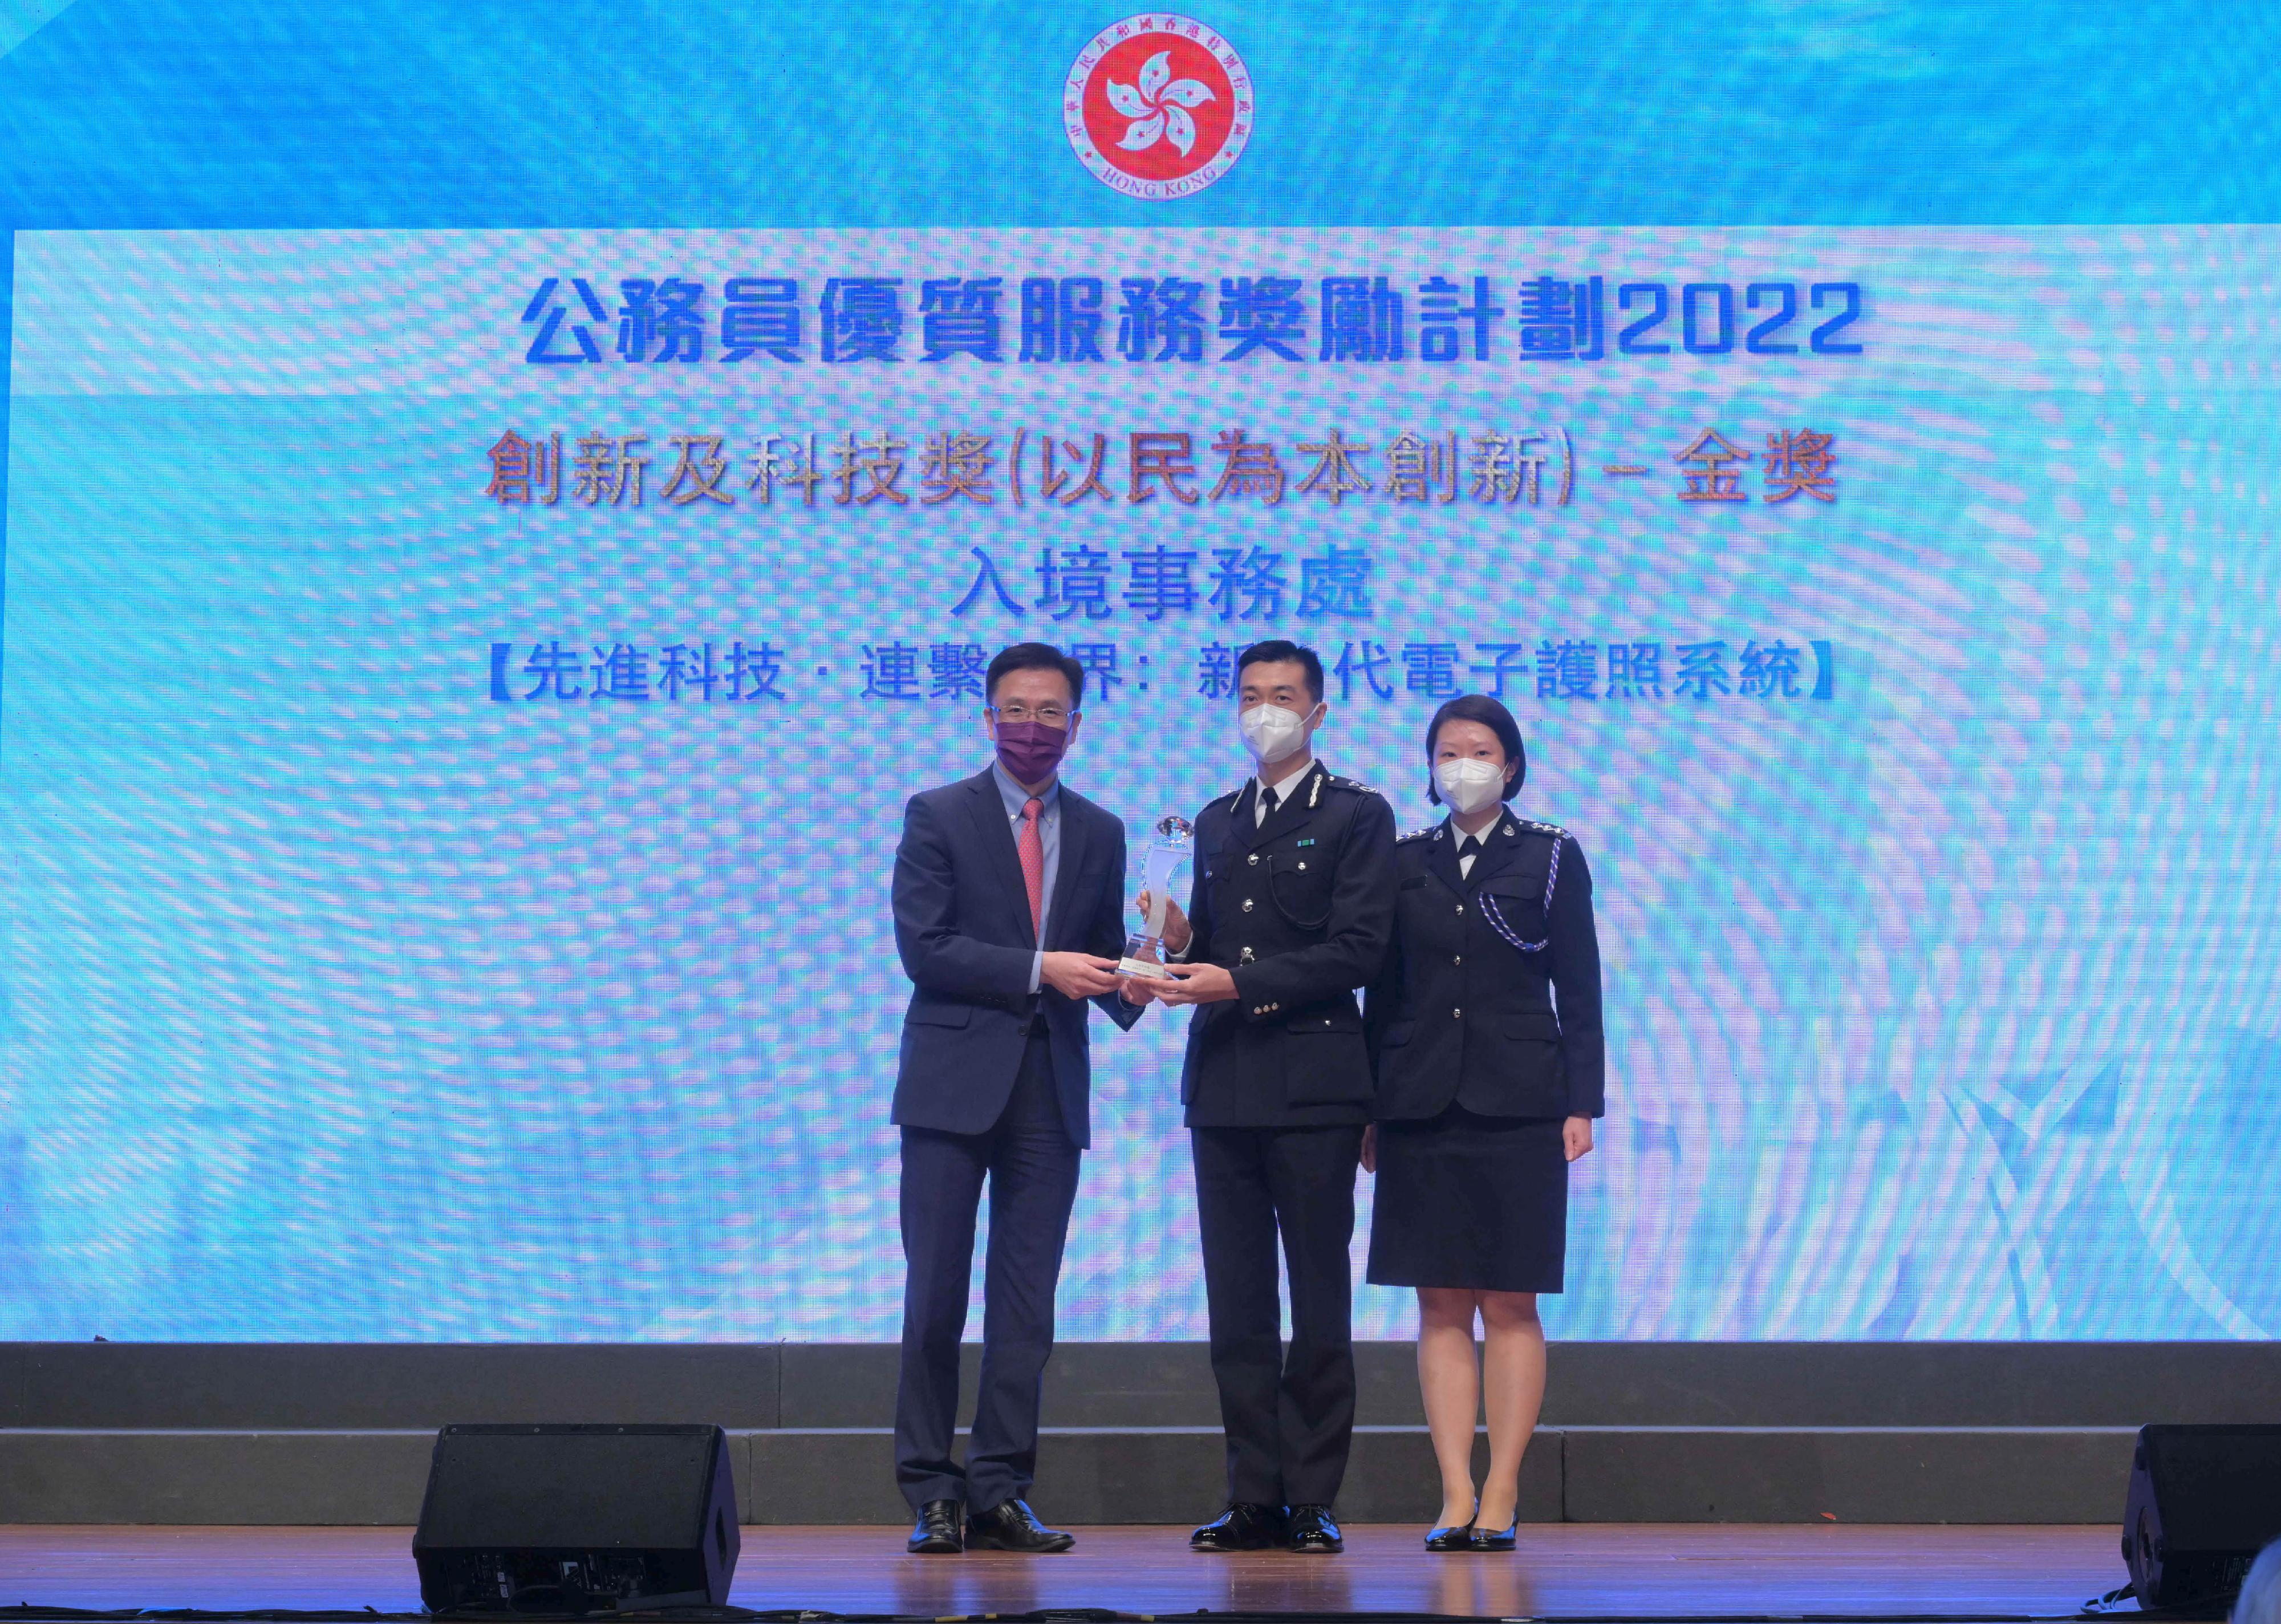 The prize presentation ceremony of the Civil Service Outstanding Service Award Scheme 2022 was held at the Hong Kong Convention and Exhibition Centre today (December 12). The Secretary for Innovation, Technology and Industry, Professor Sun Dong (left), presents the gold prize for the Innovation and Technology Award (Best Citizen-centric Innovation) to representatives of the Immigration Department at the ceremony.